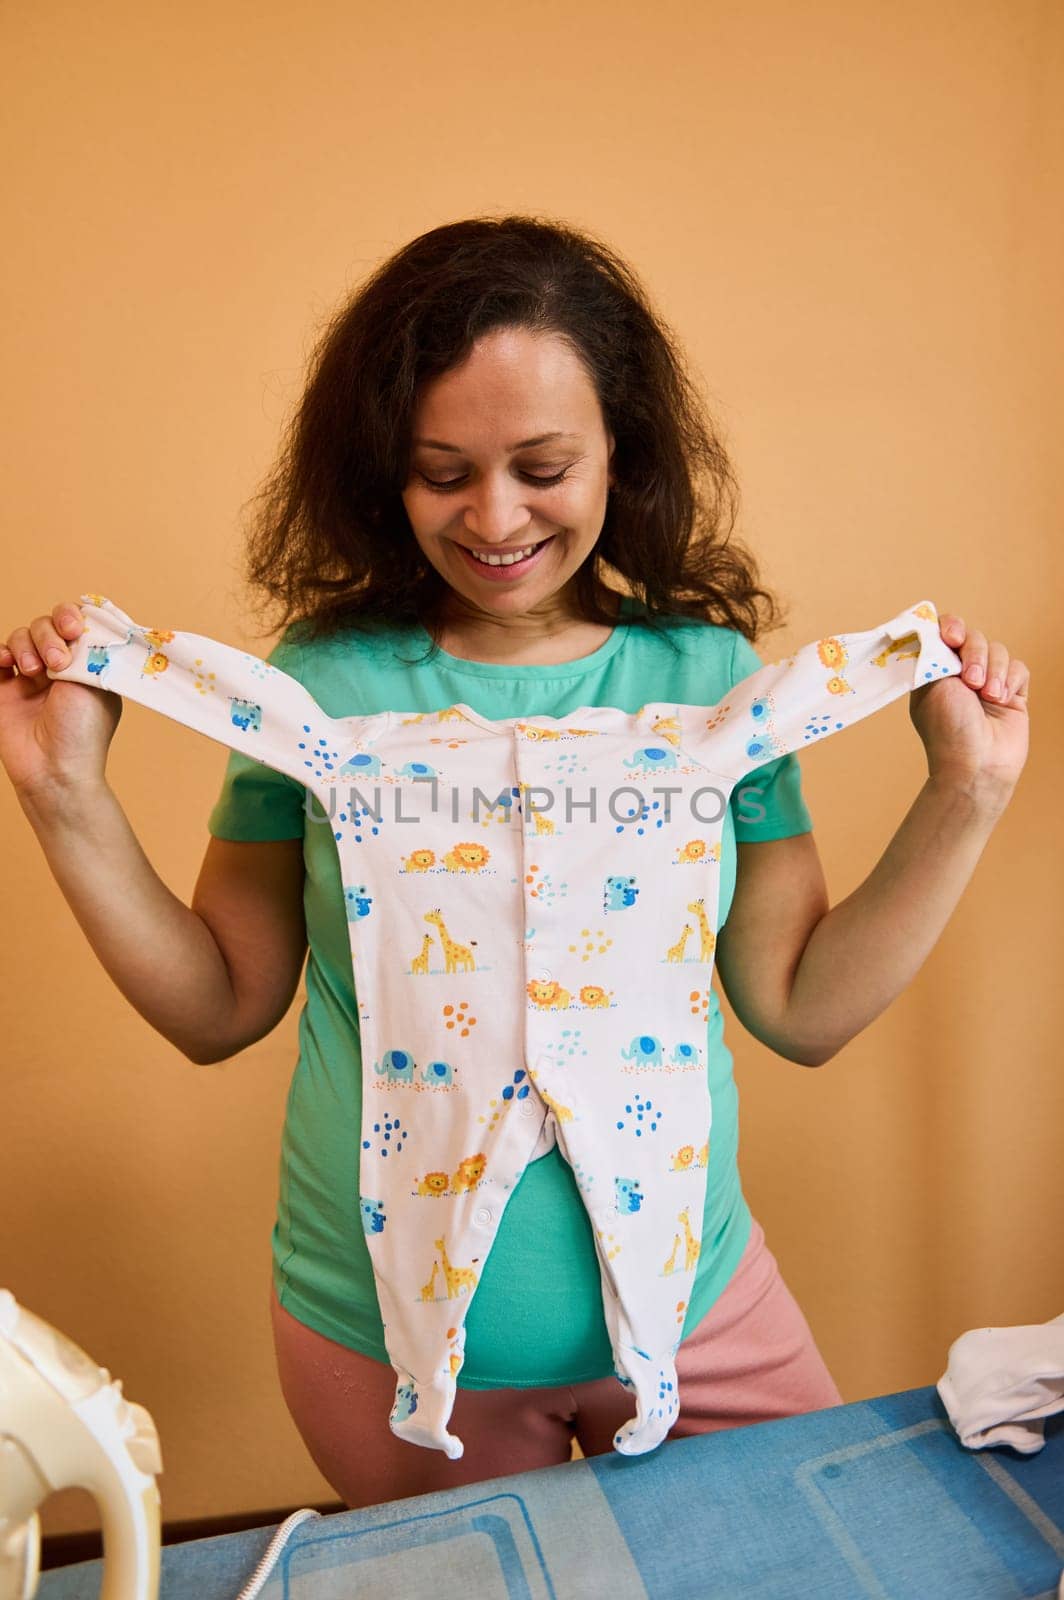 Happy smiling pregnant woman holding a cute jumpsuit for her newborn baby, standing by ironing desk while preparing bag for maternity hospital. Motherhood. Pregnancy last trimester. People. Lifestyle.